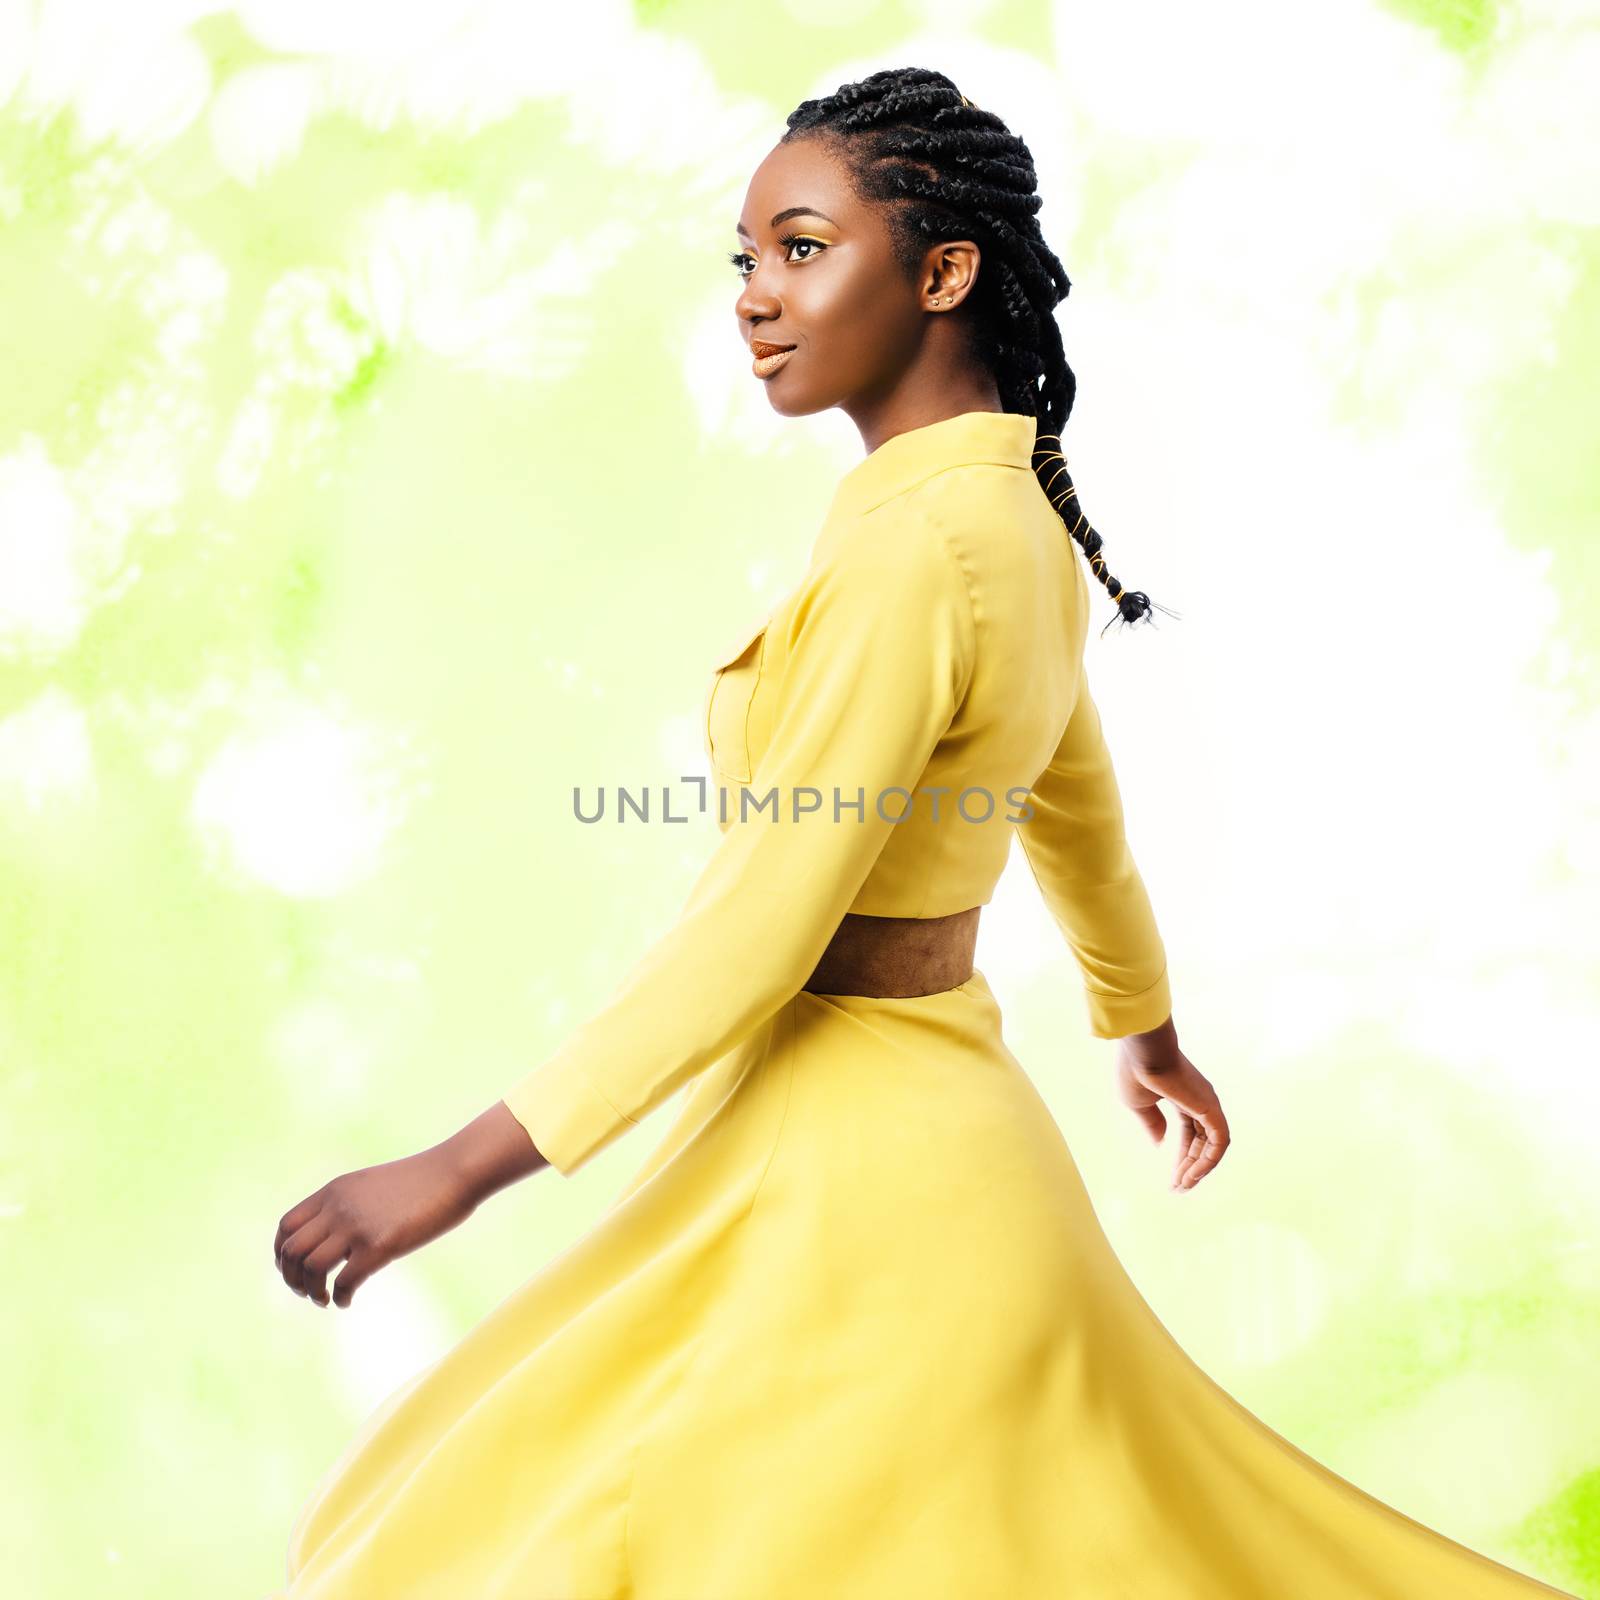 Studio portrait of African woman in yellow dress. by karelnoppe